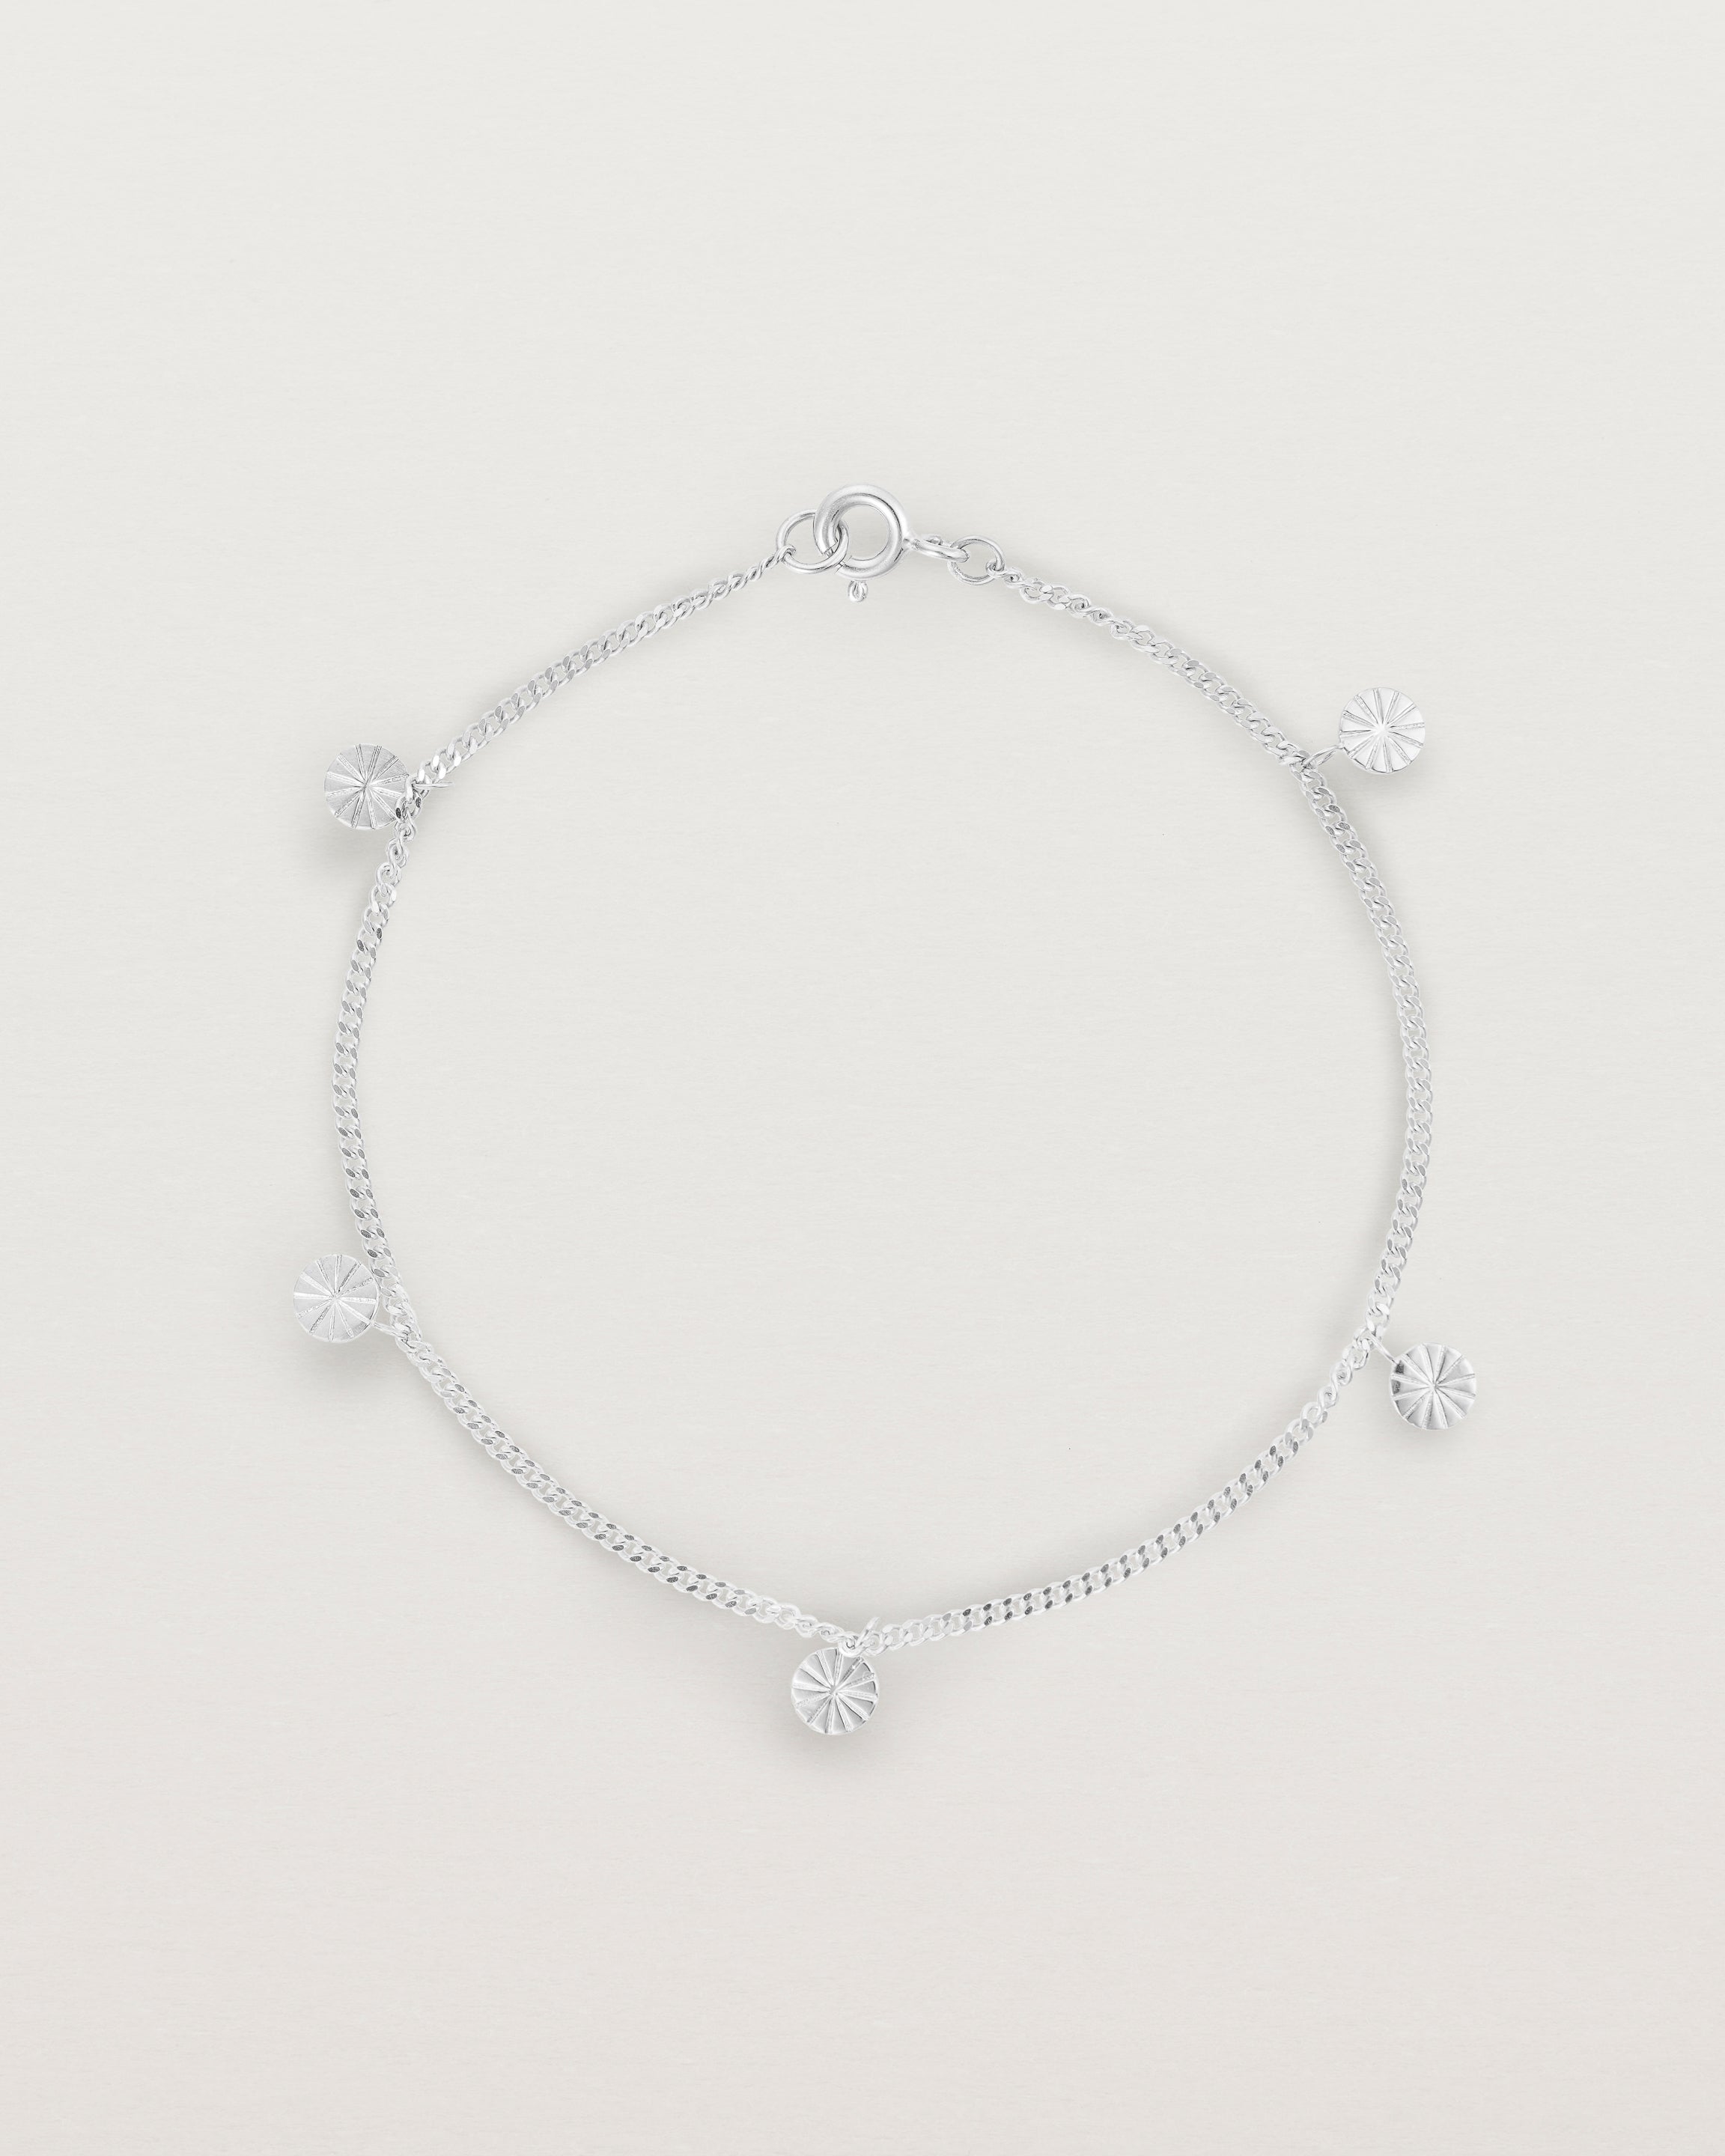 A silver chain bracelet with five circle charms